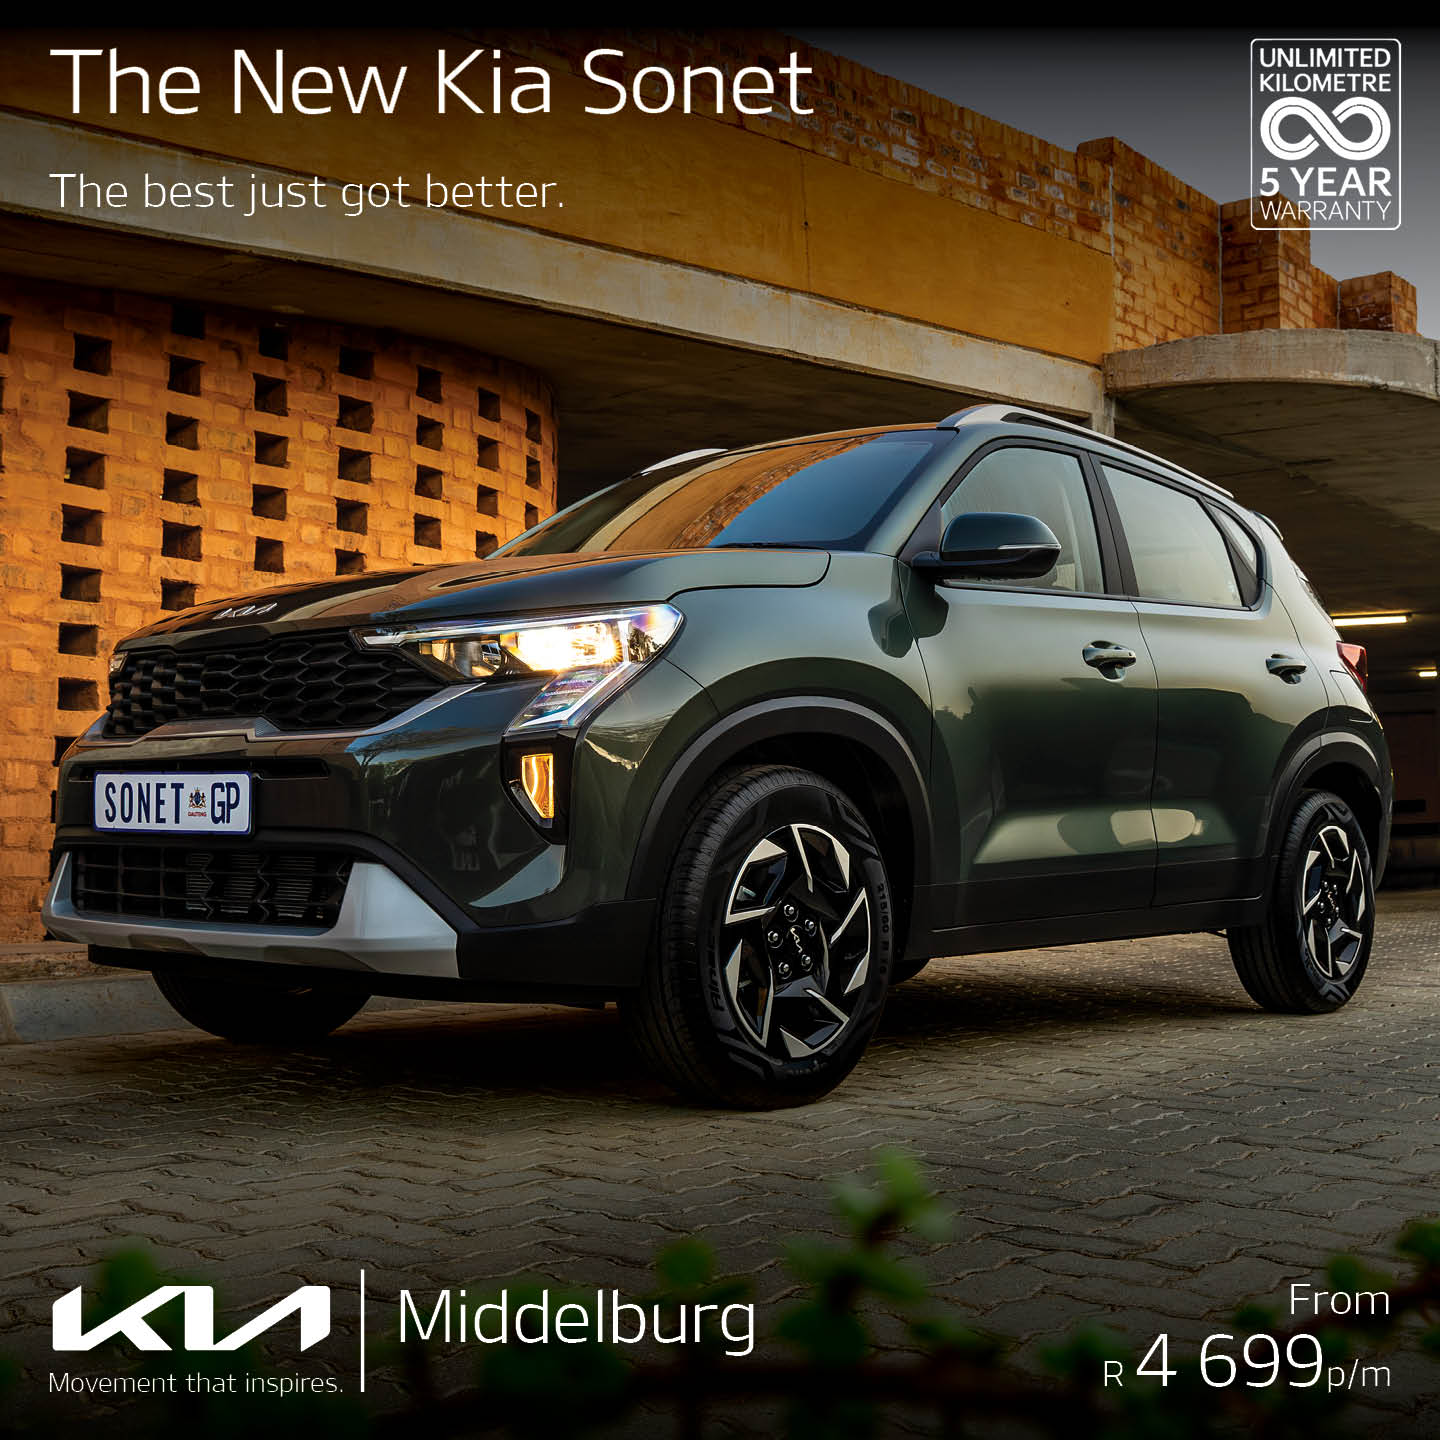 The best just got better! The New KIA Sonet image from 